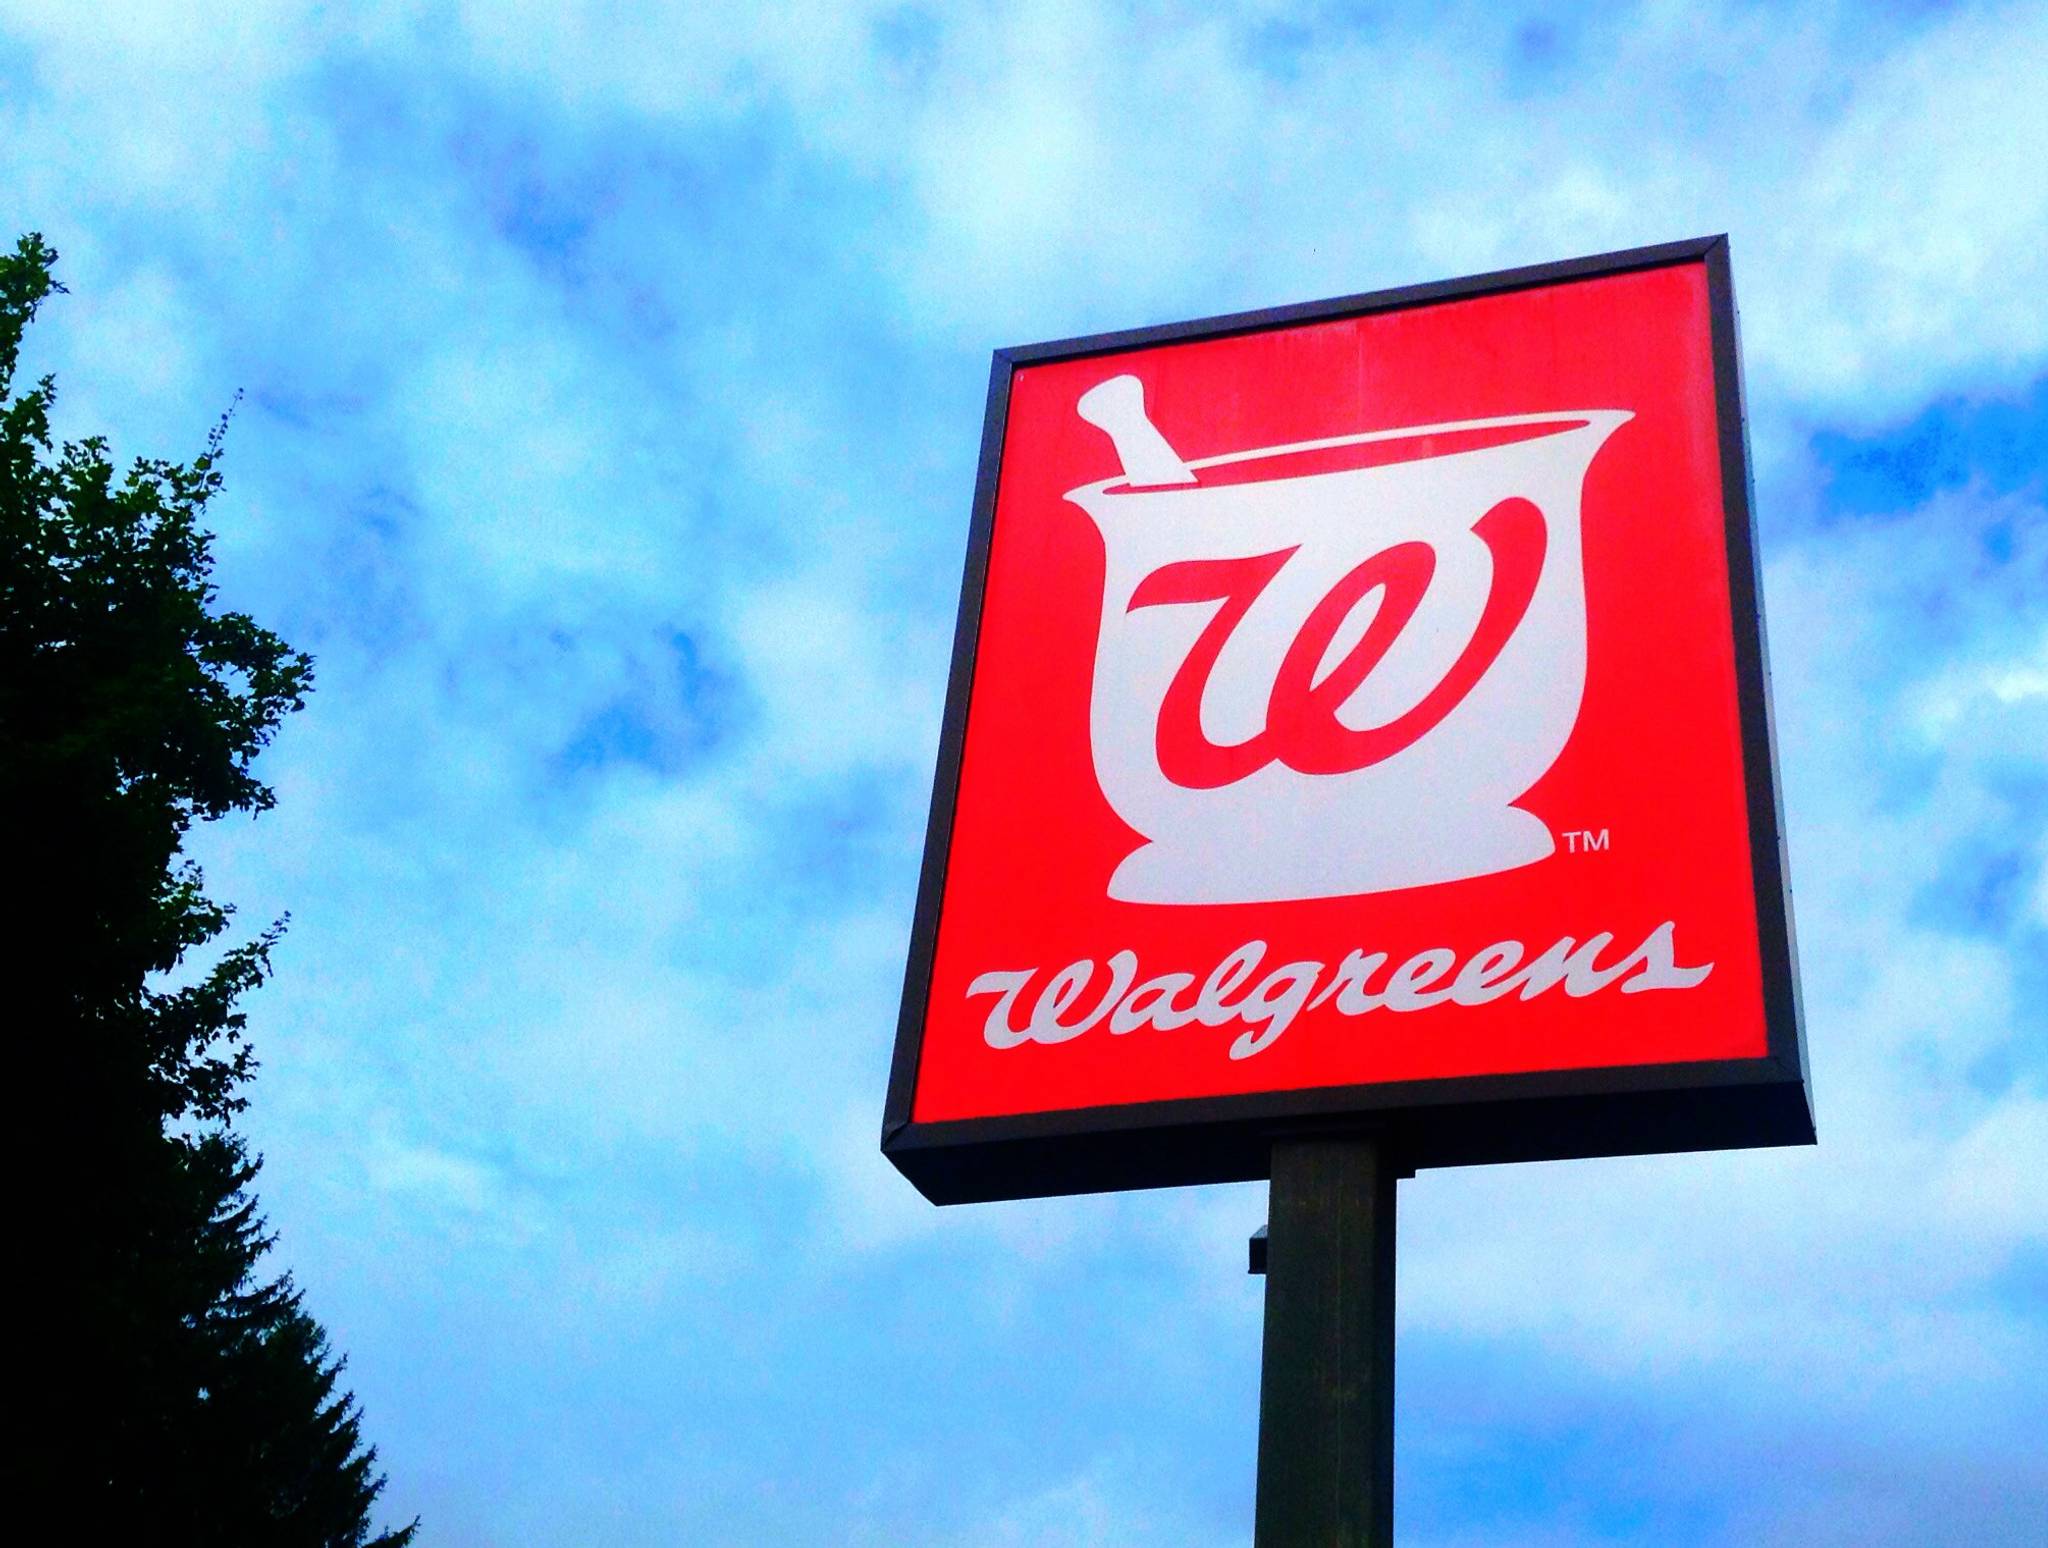 Walgreens offers discounts for exercising